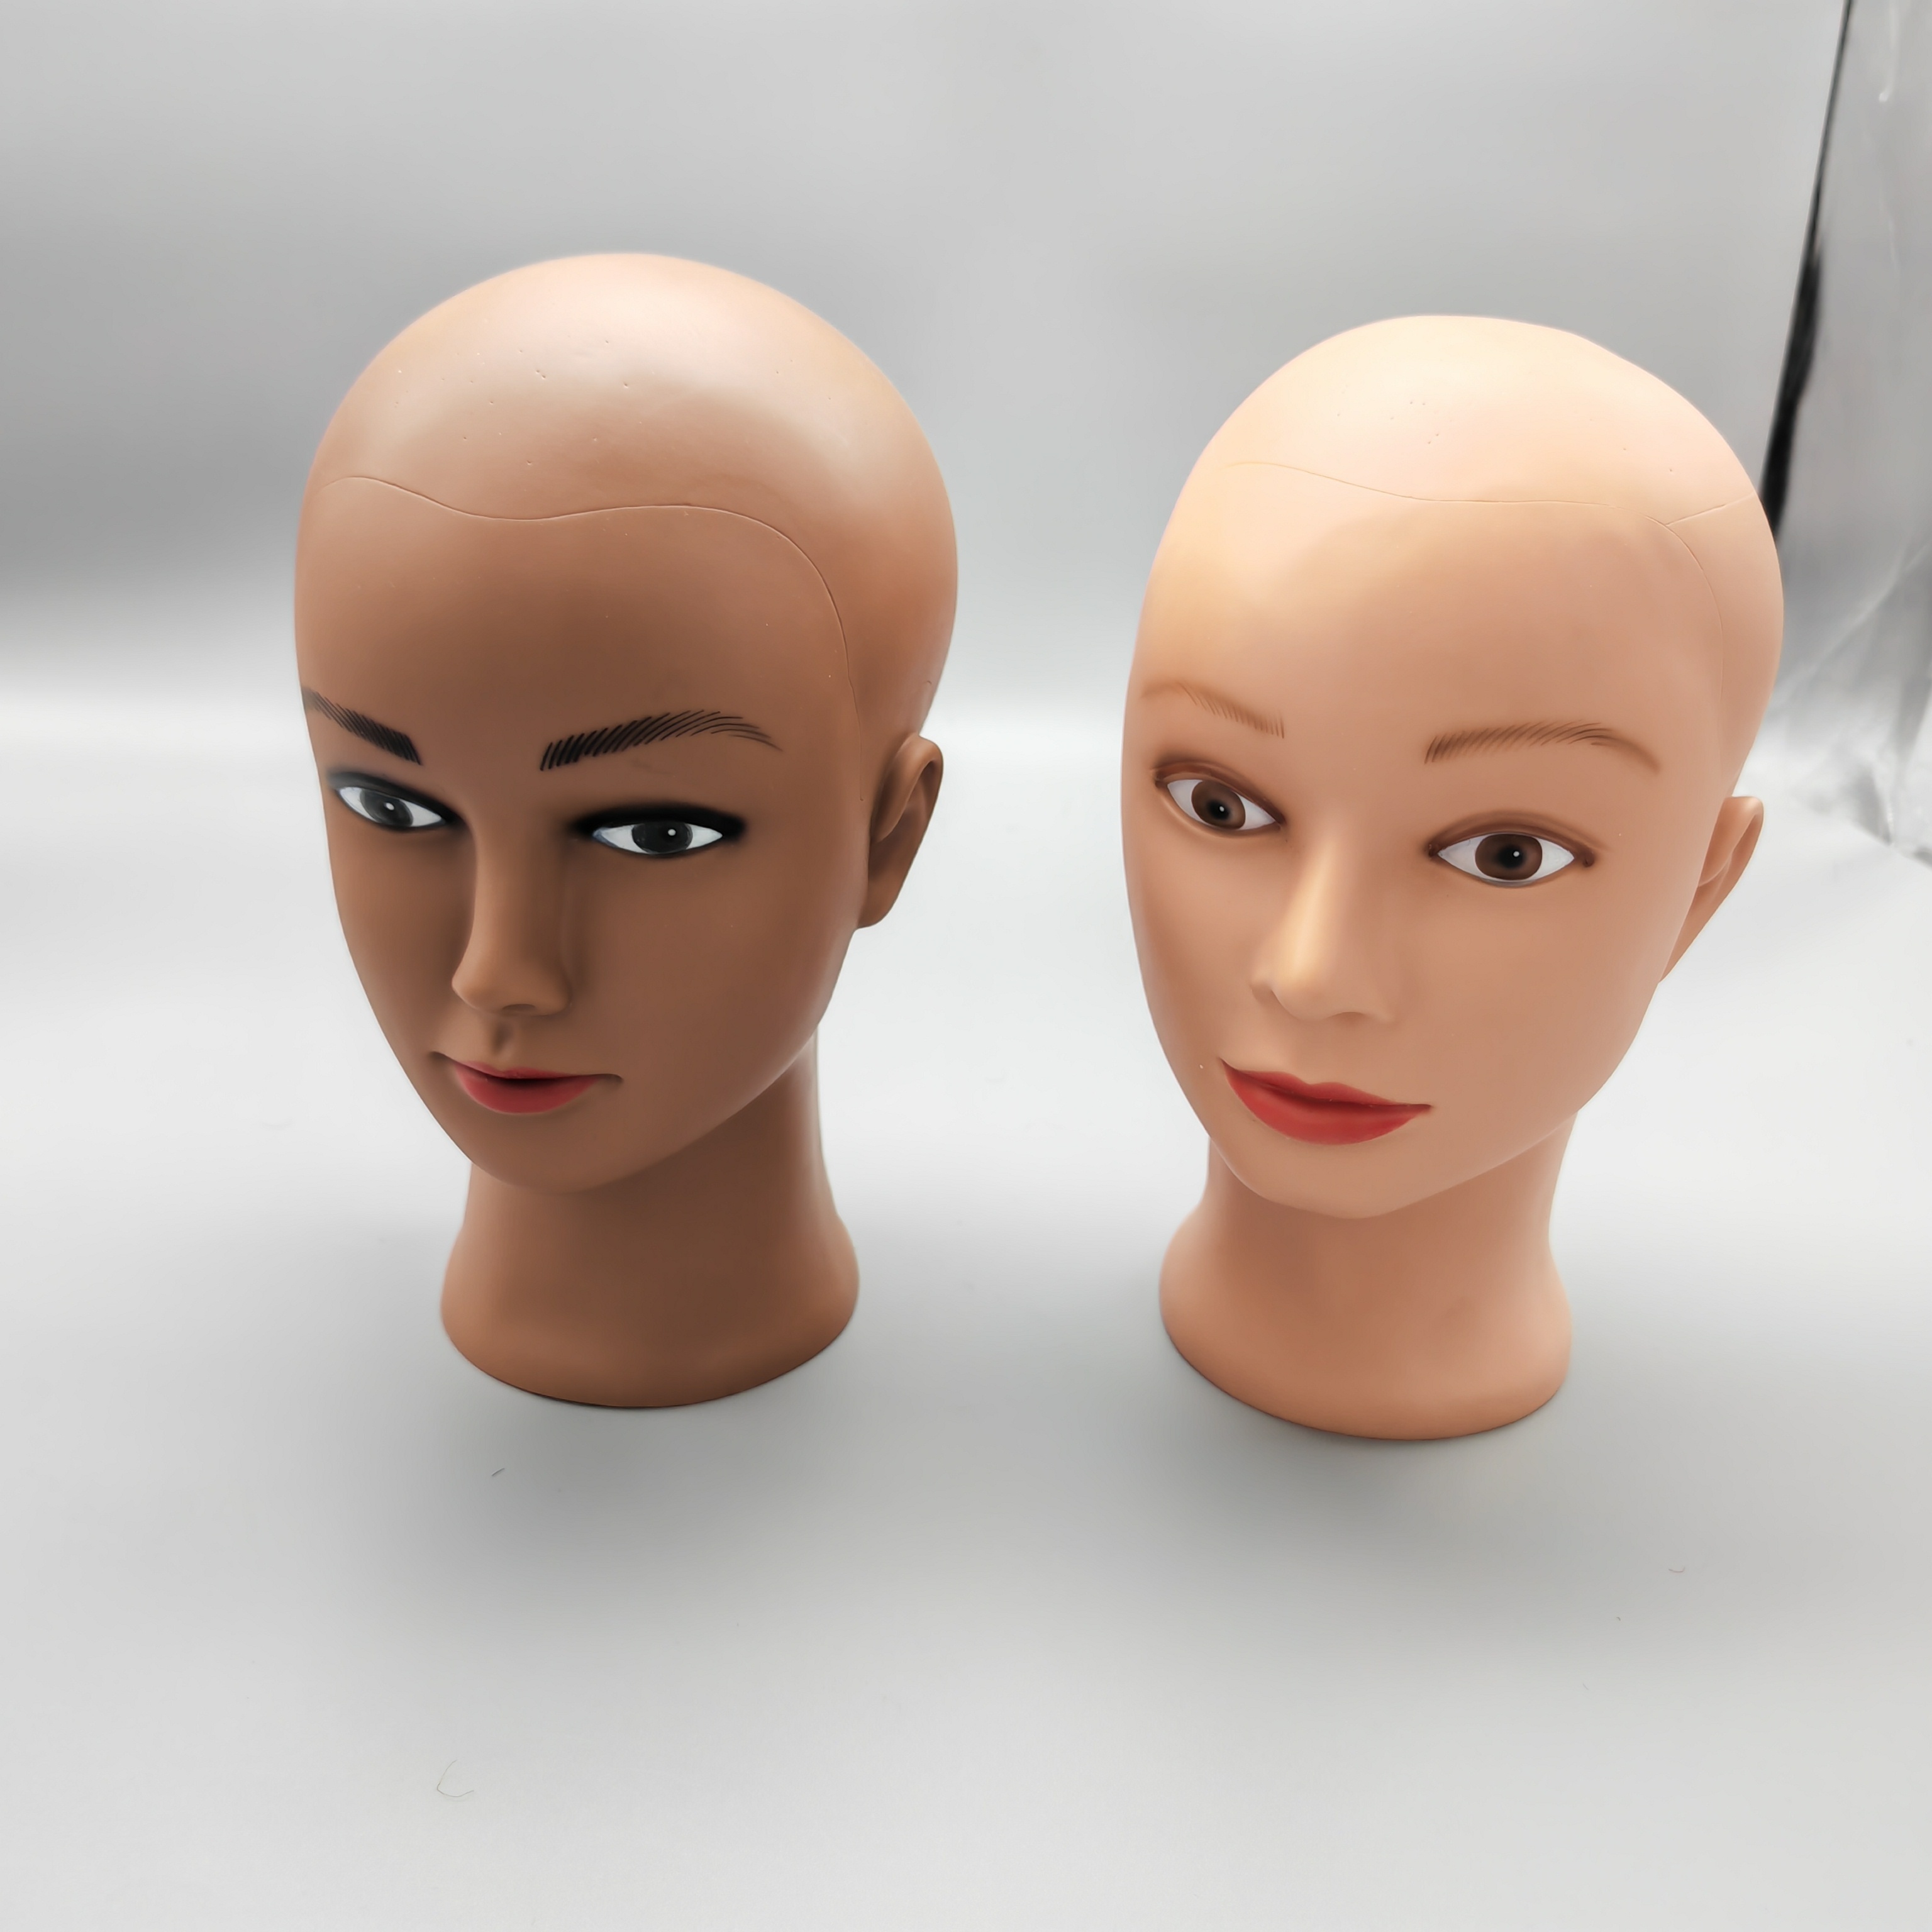 Why this mannequin head is a seriously cool birthday gift for a